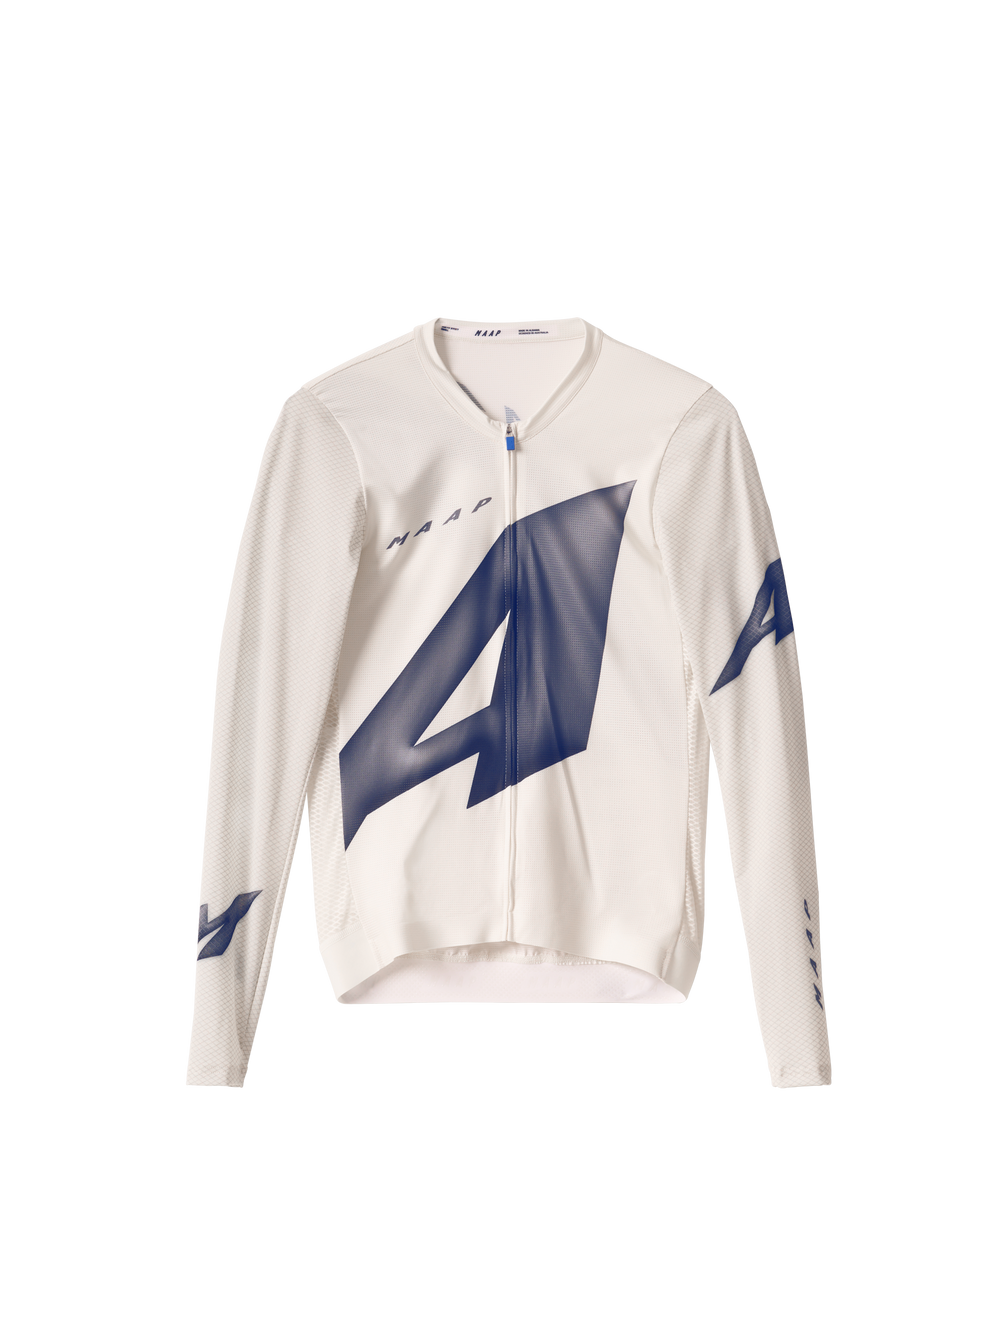 Product Image for Orbit Pro Air LS Jersey